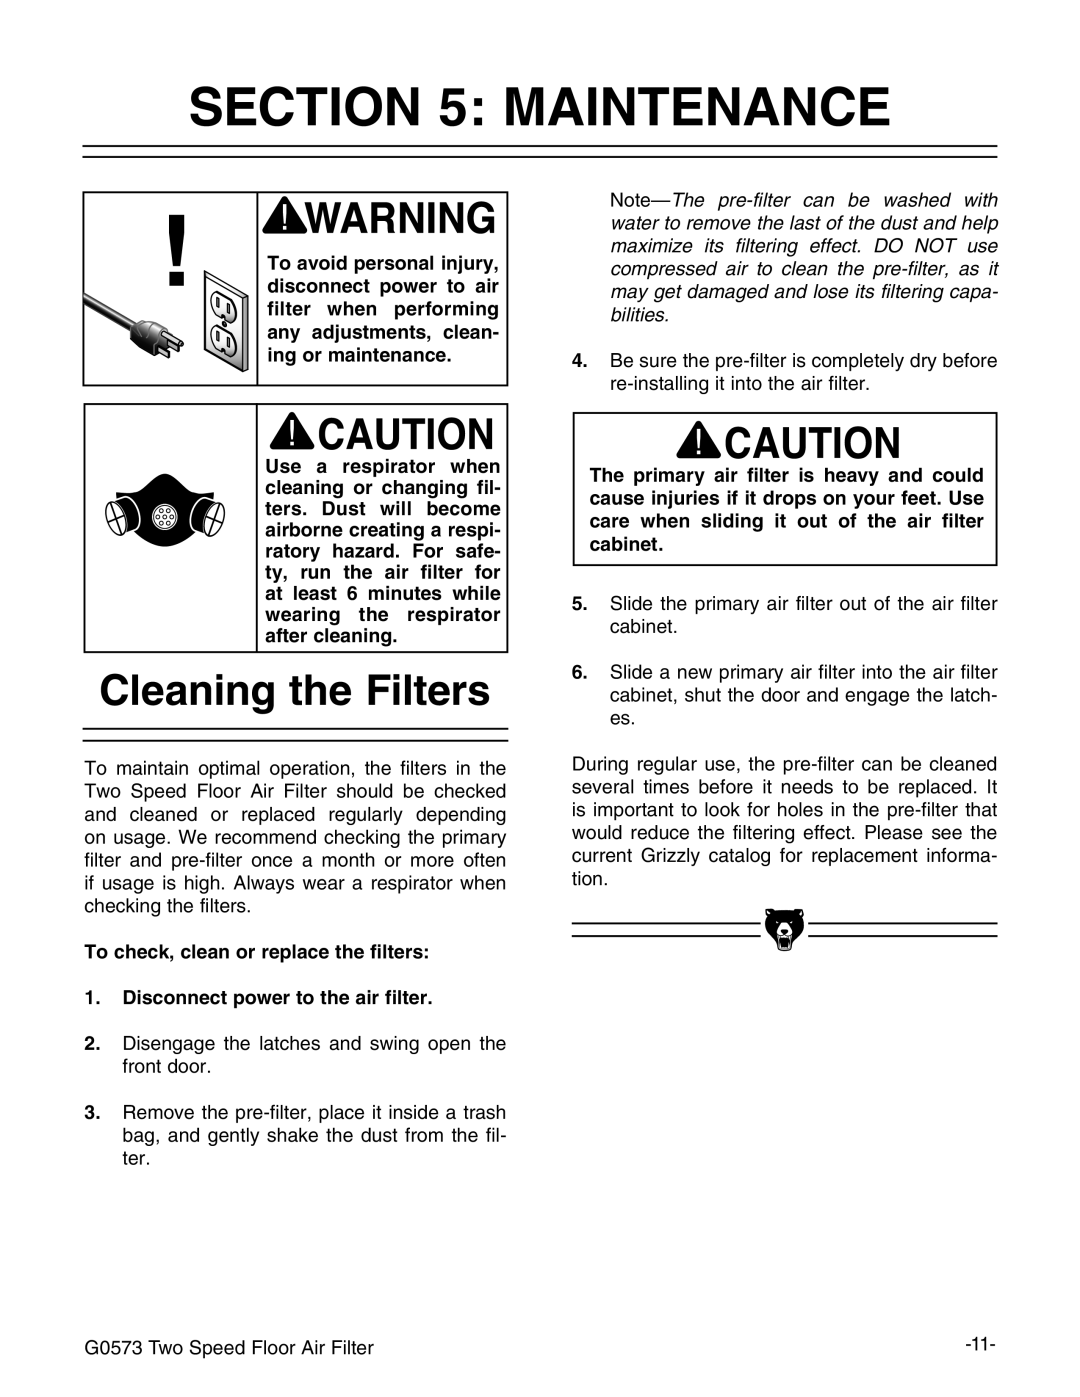 Grizzly G0573 instruction manual Maintenance, Cleaning the Filters 